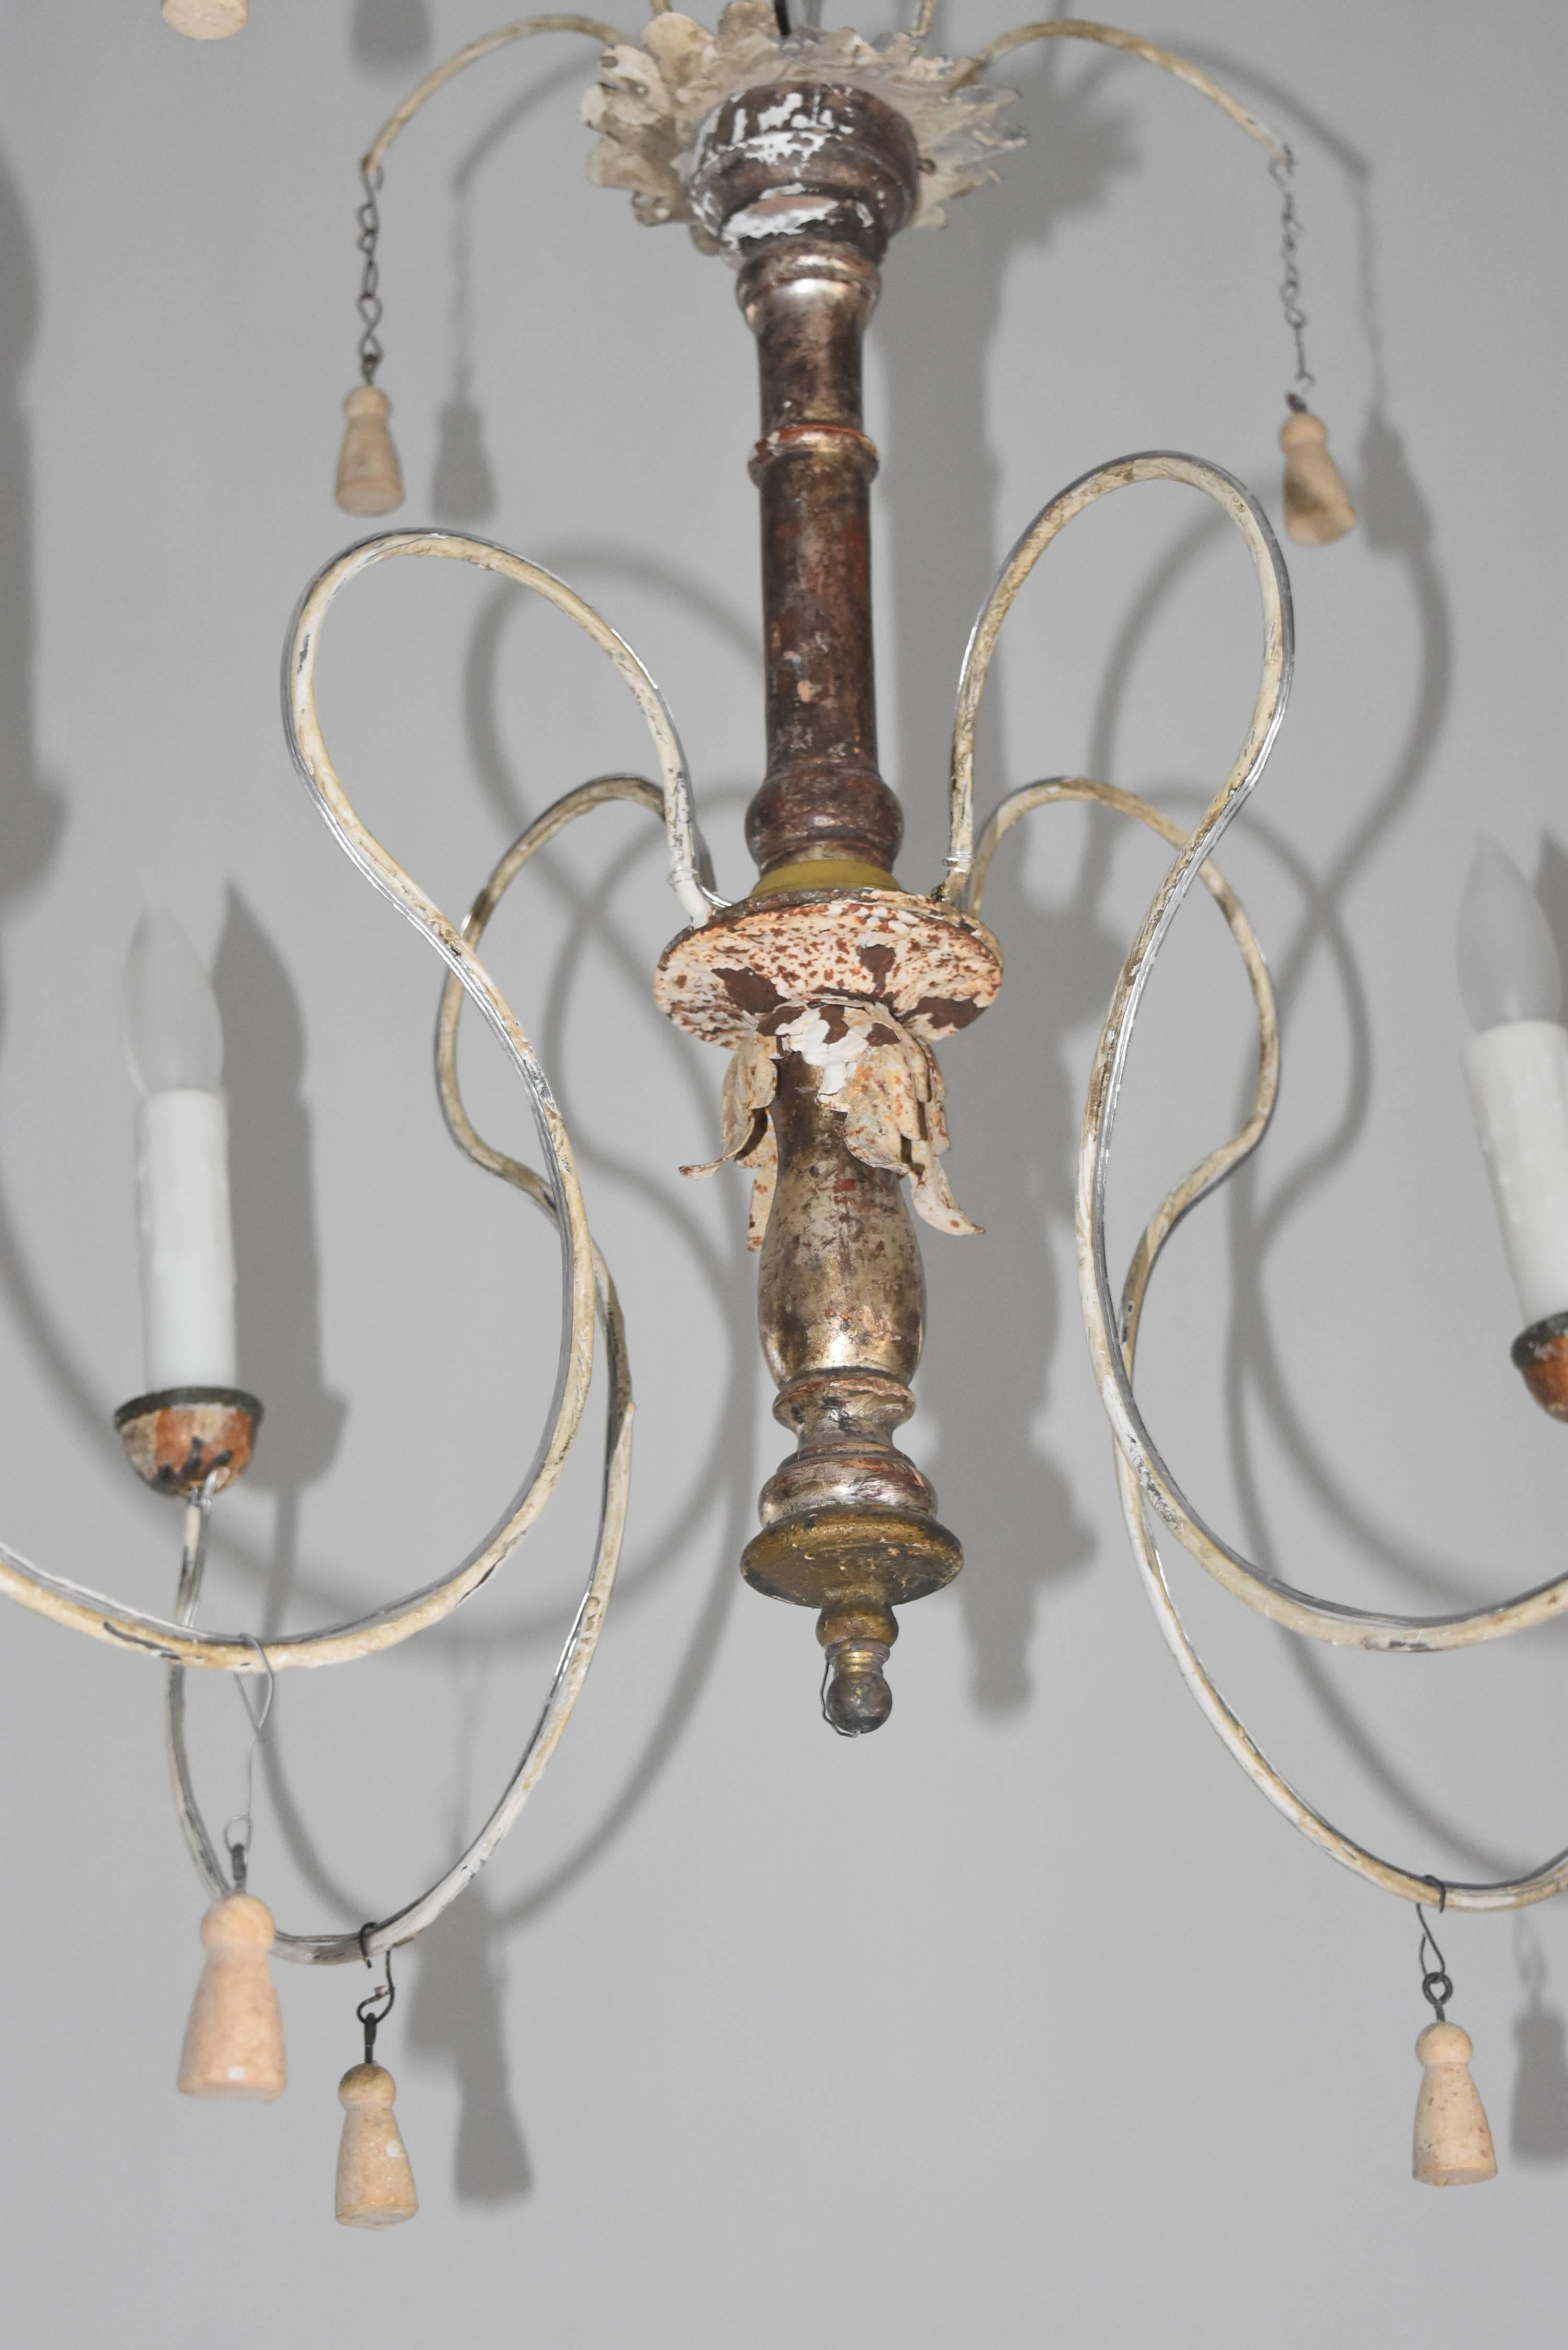 Italian Spider Chandelier Handmade with Antique Altar Elements and Iron 1